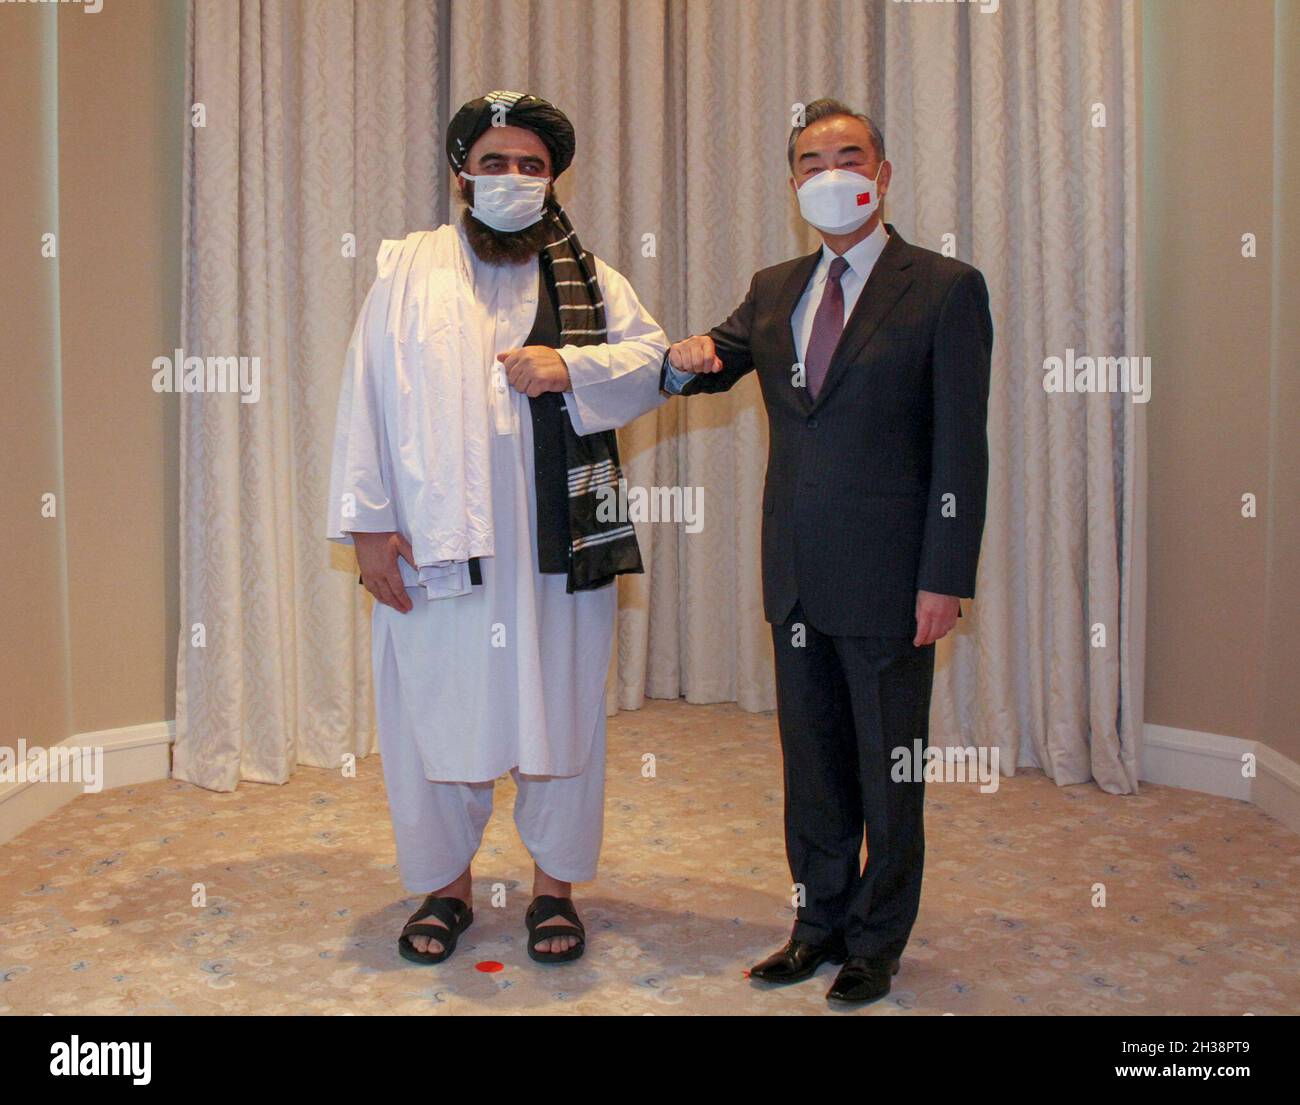 Doha, Qatar. 26th Oct, 2021. Chinese State Councilor and Foreign Minister Wang Yi (R) meets with Amir Khan Muttaqi, acting foreign minister of the Afghan Taliban's interim government, in Doha, Qatar, on Oct. 26, 2021. Credit: Yang Yuanyong/Xinhua/Alamy Live News Stock Photo